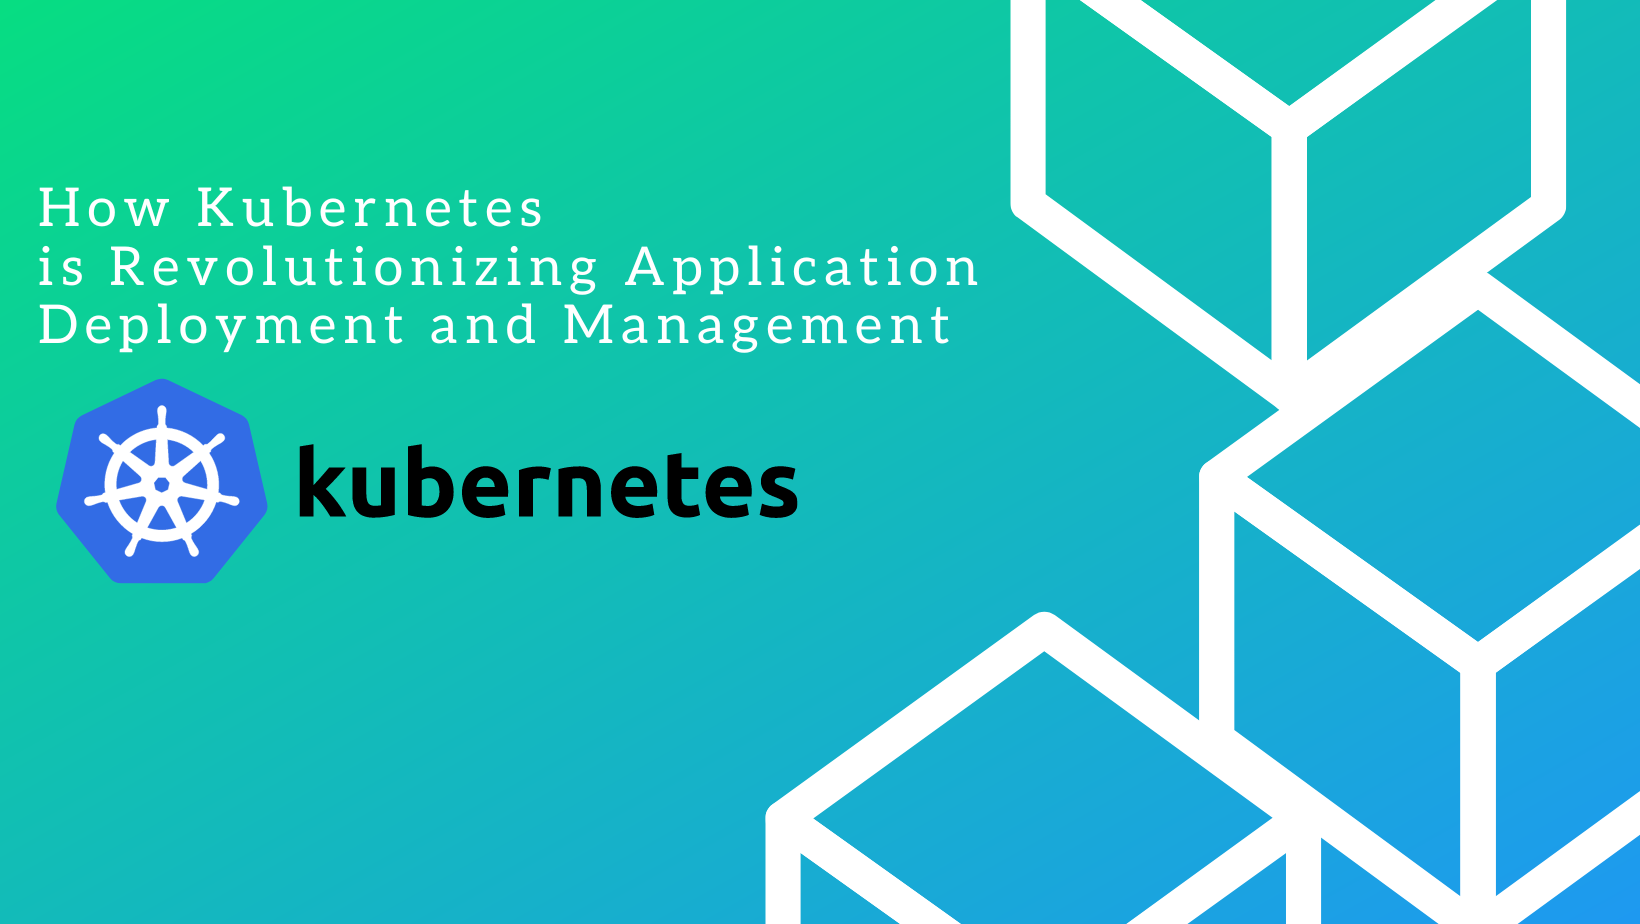 How Kubernetes is Revolutionizing Application Deployment and Management